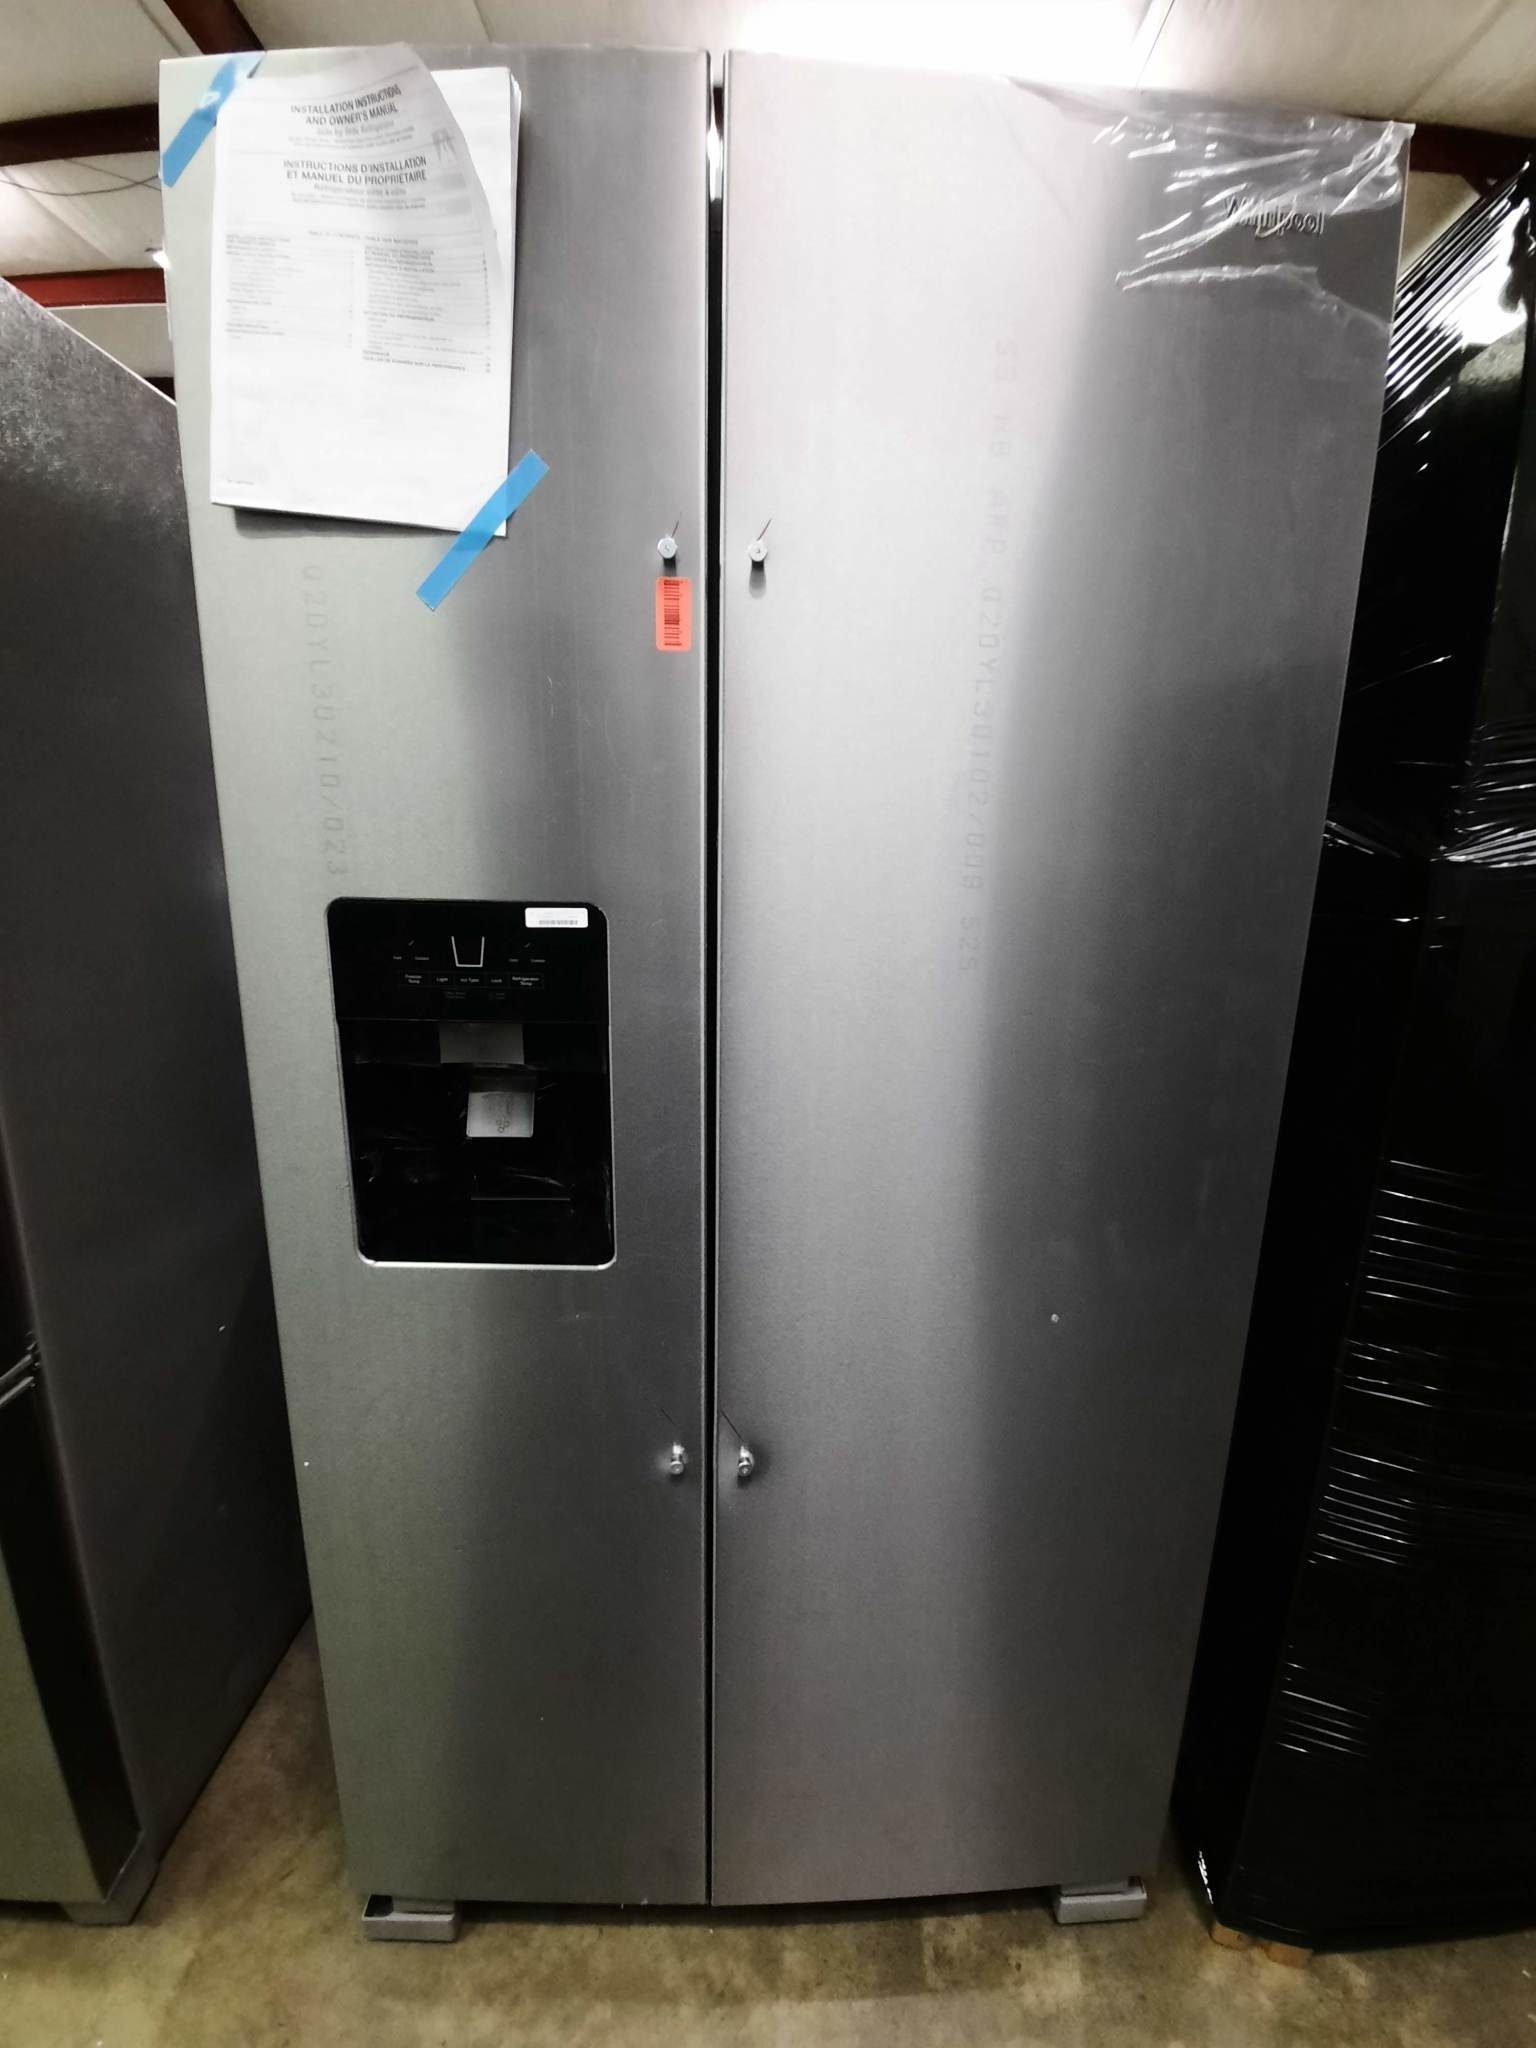 Whirlpool WRS325SDHZ 25 Cu. ft. 36 Side-by-Side Refrigerator - Stainless Steel